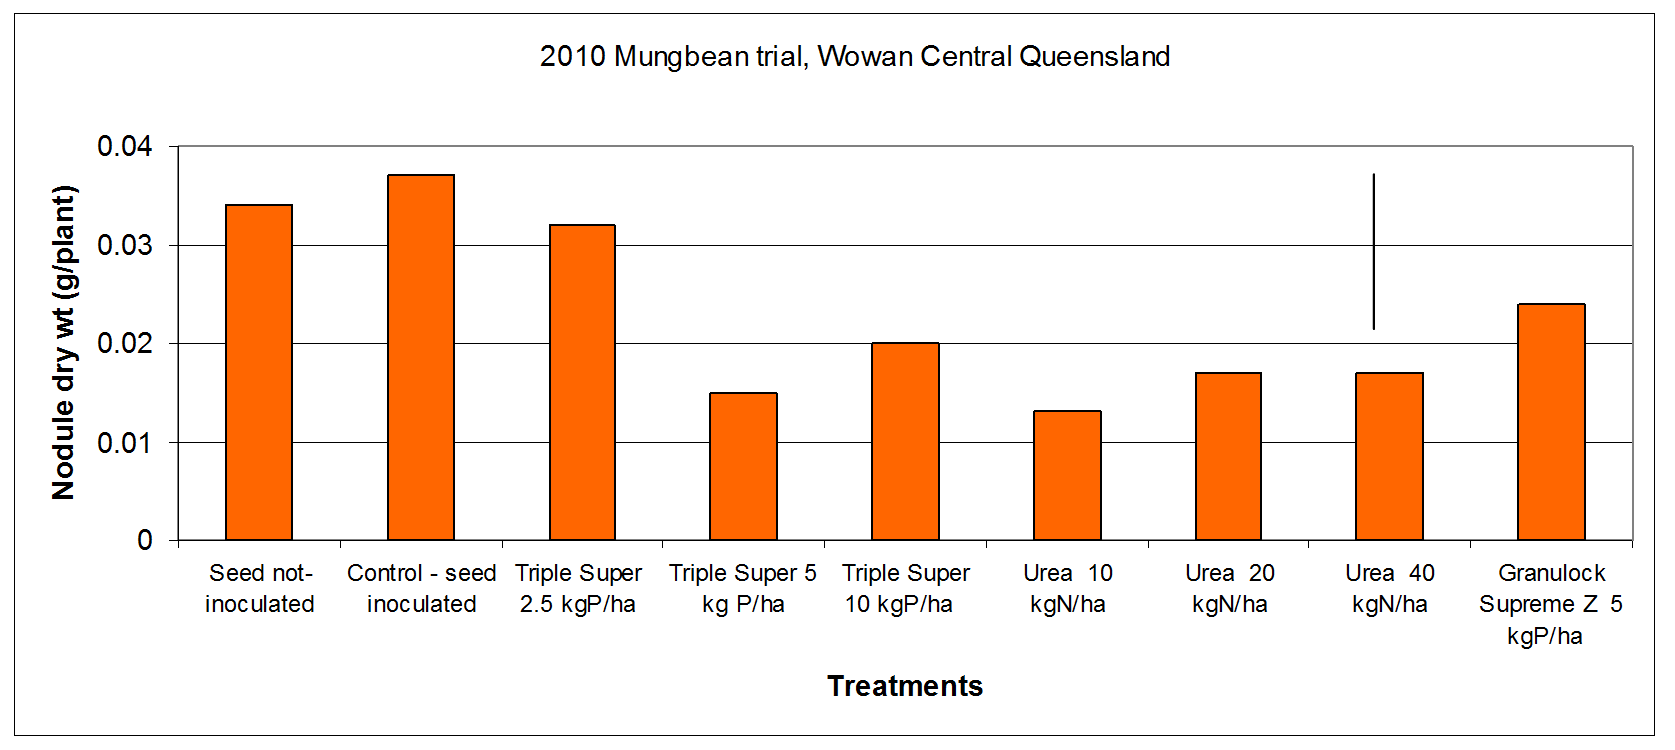 Graph from 2010 Mungbean trial at Wowan Central Queensland shows results of nodule dry weight for treatments. Text description follows.